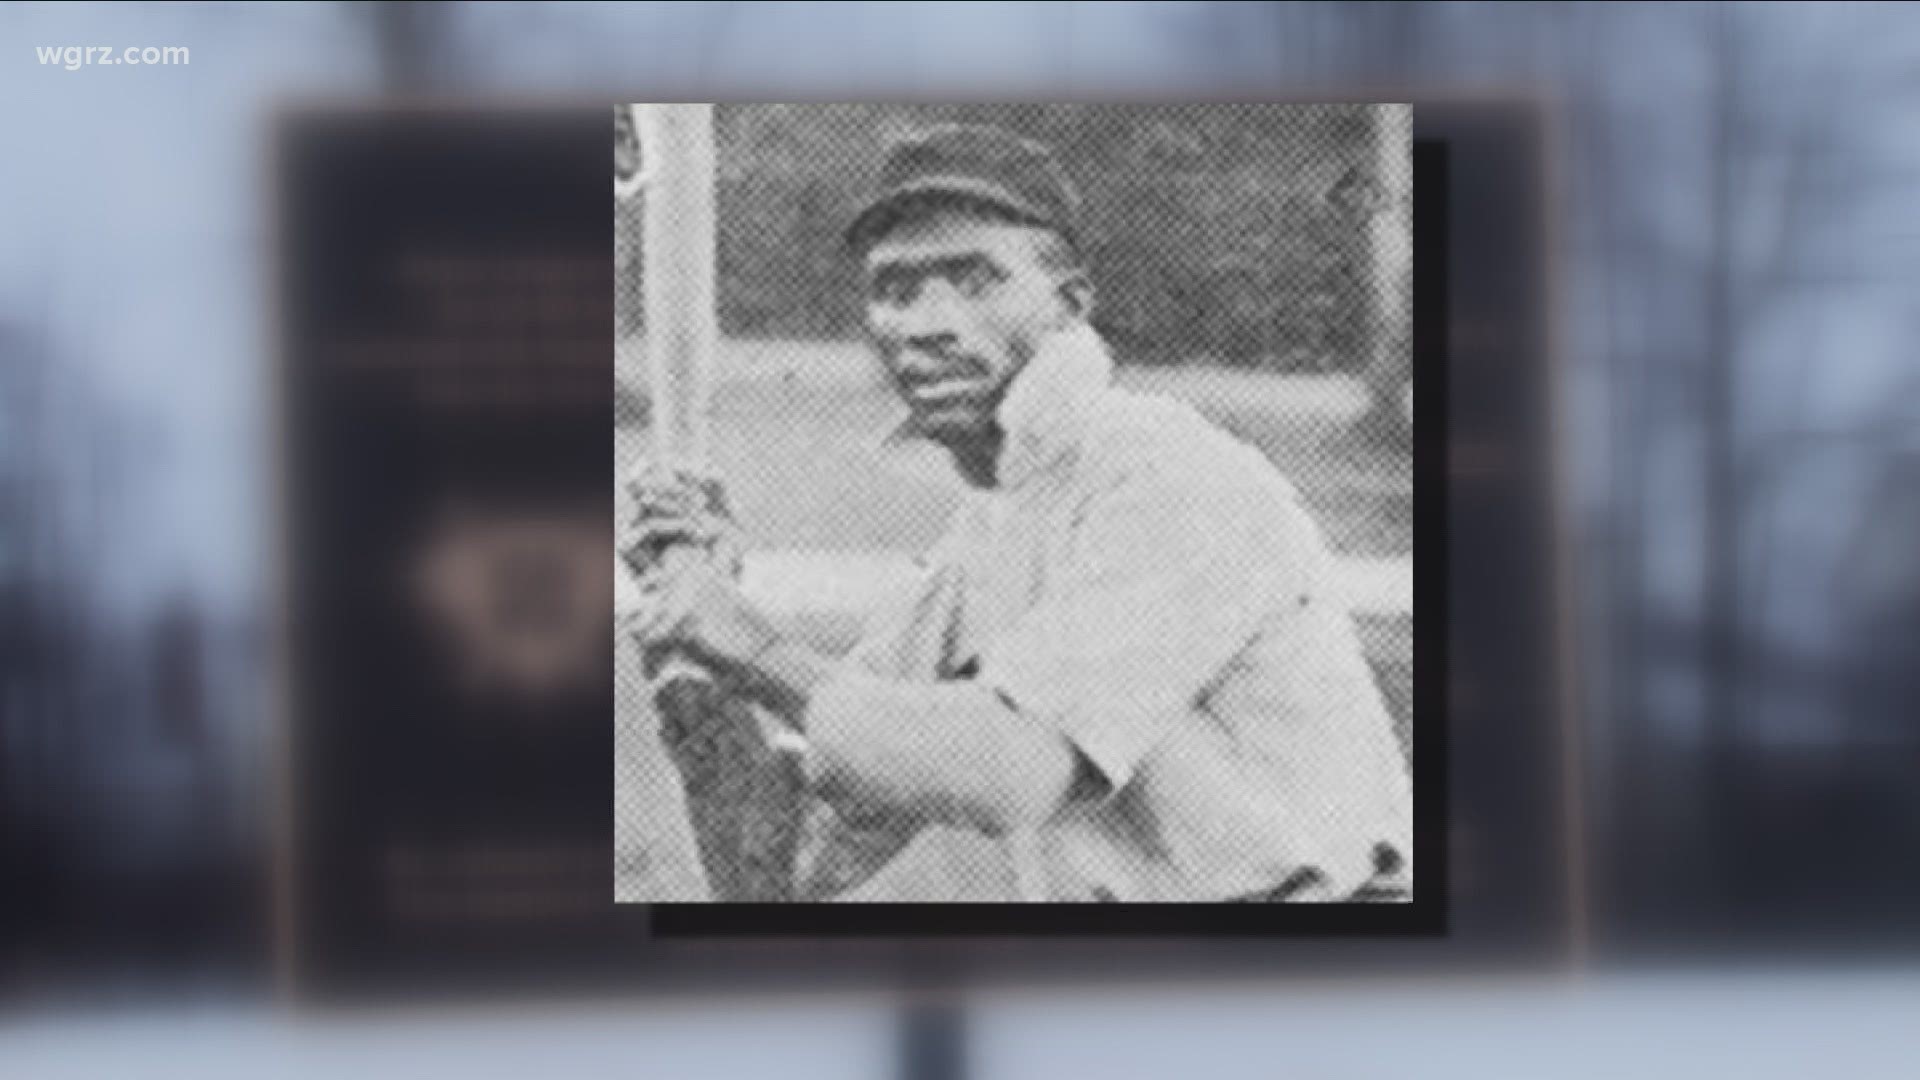 Efforts are underway to get the Hall of Fame to remember the man considered to be one of the best hitters of the early years of baseball.